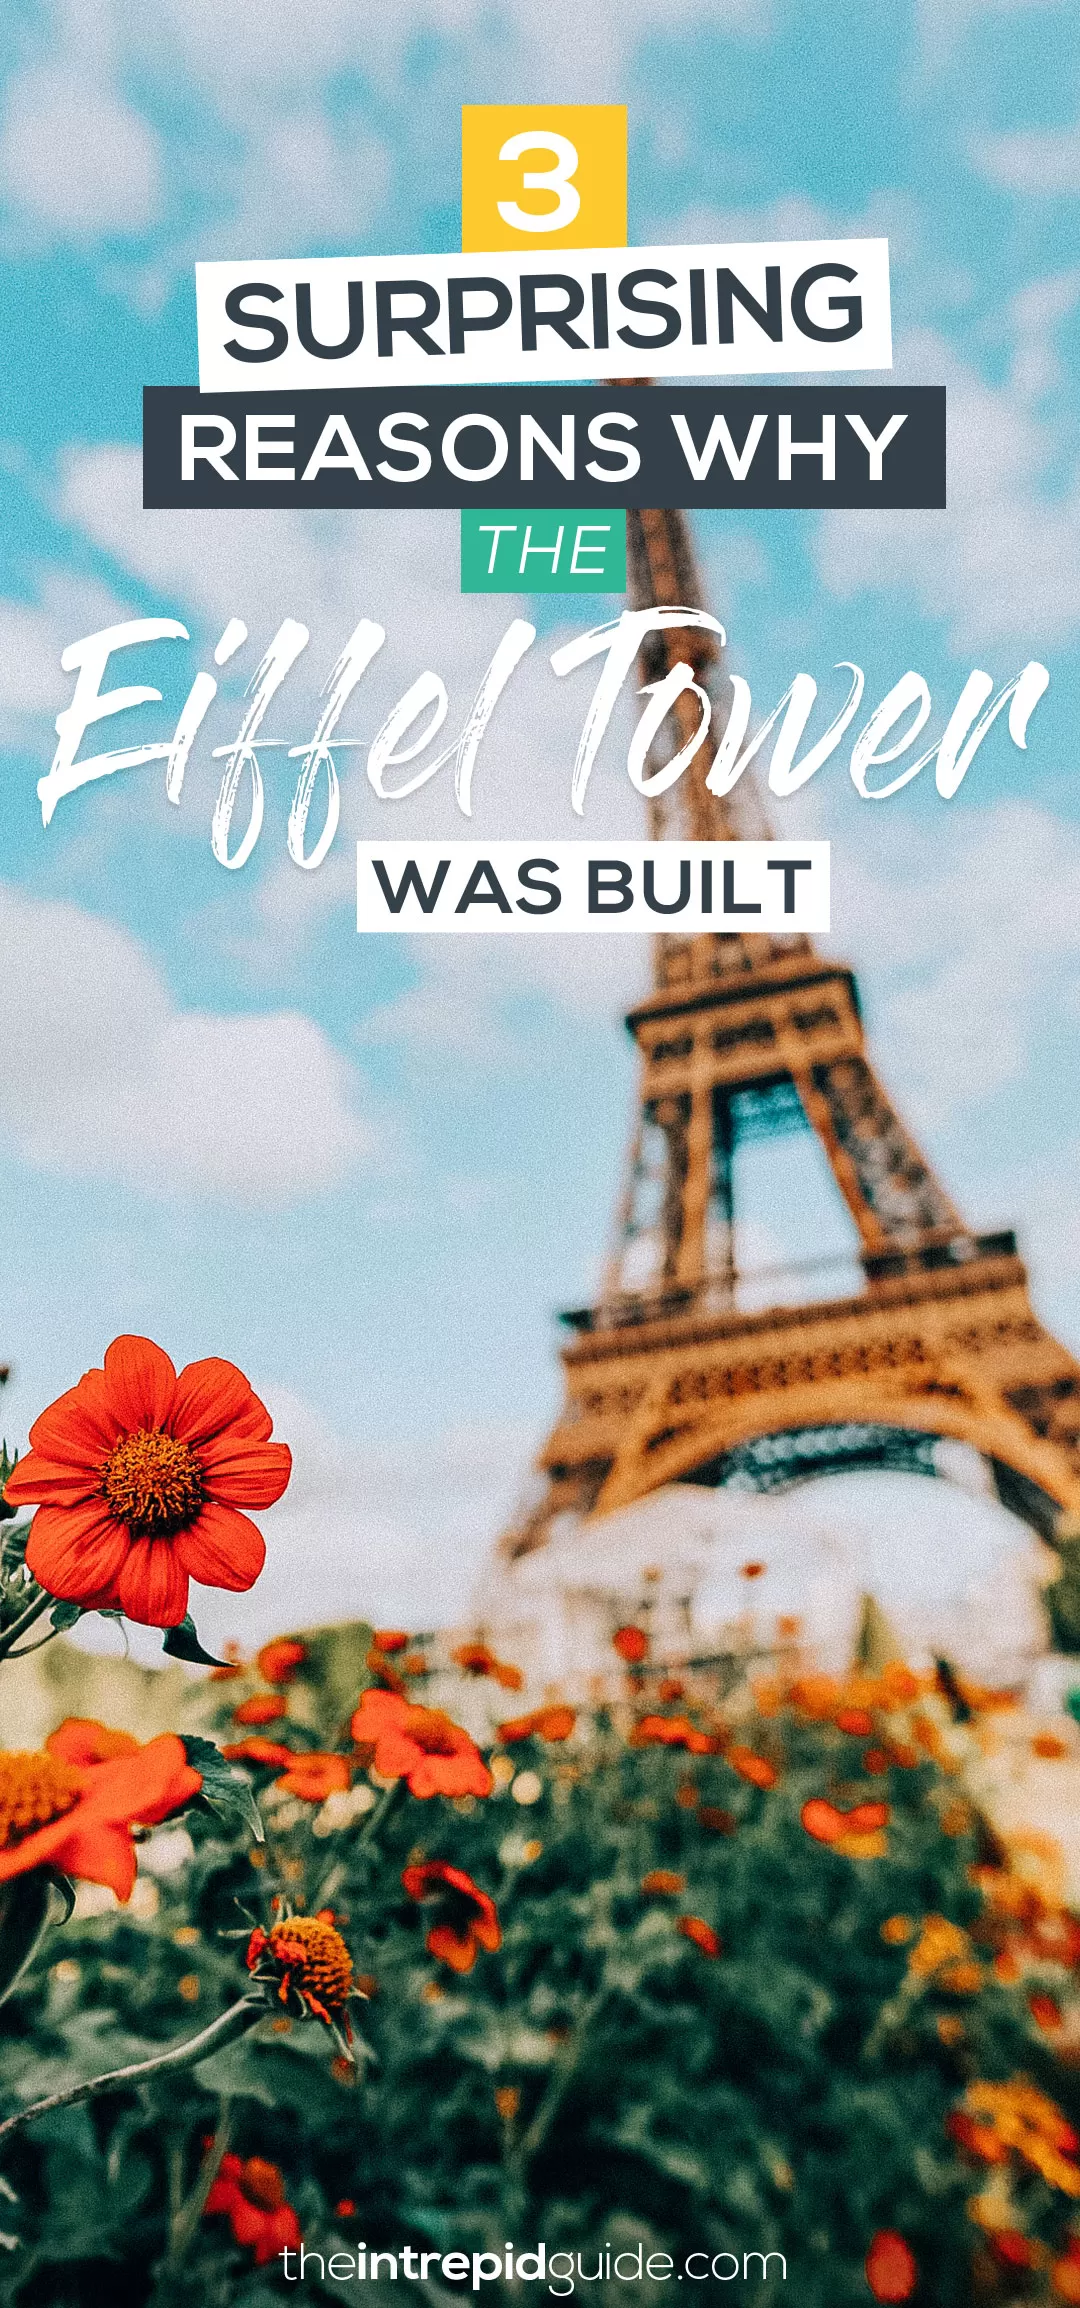 When was the Eiffel Tower Built and Why: 3 Surprising Reasons